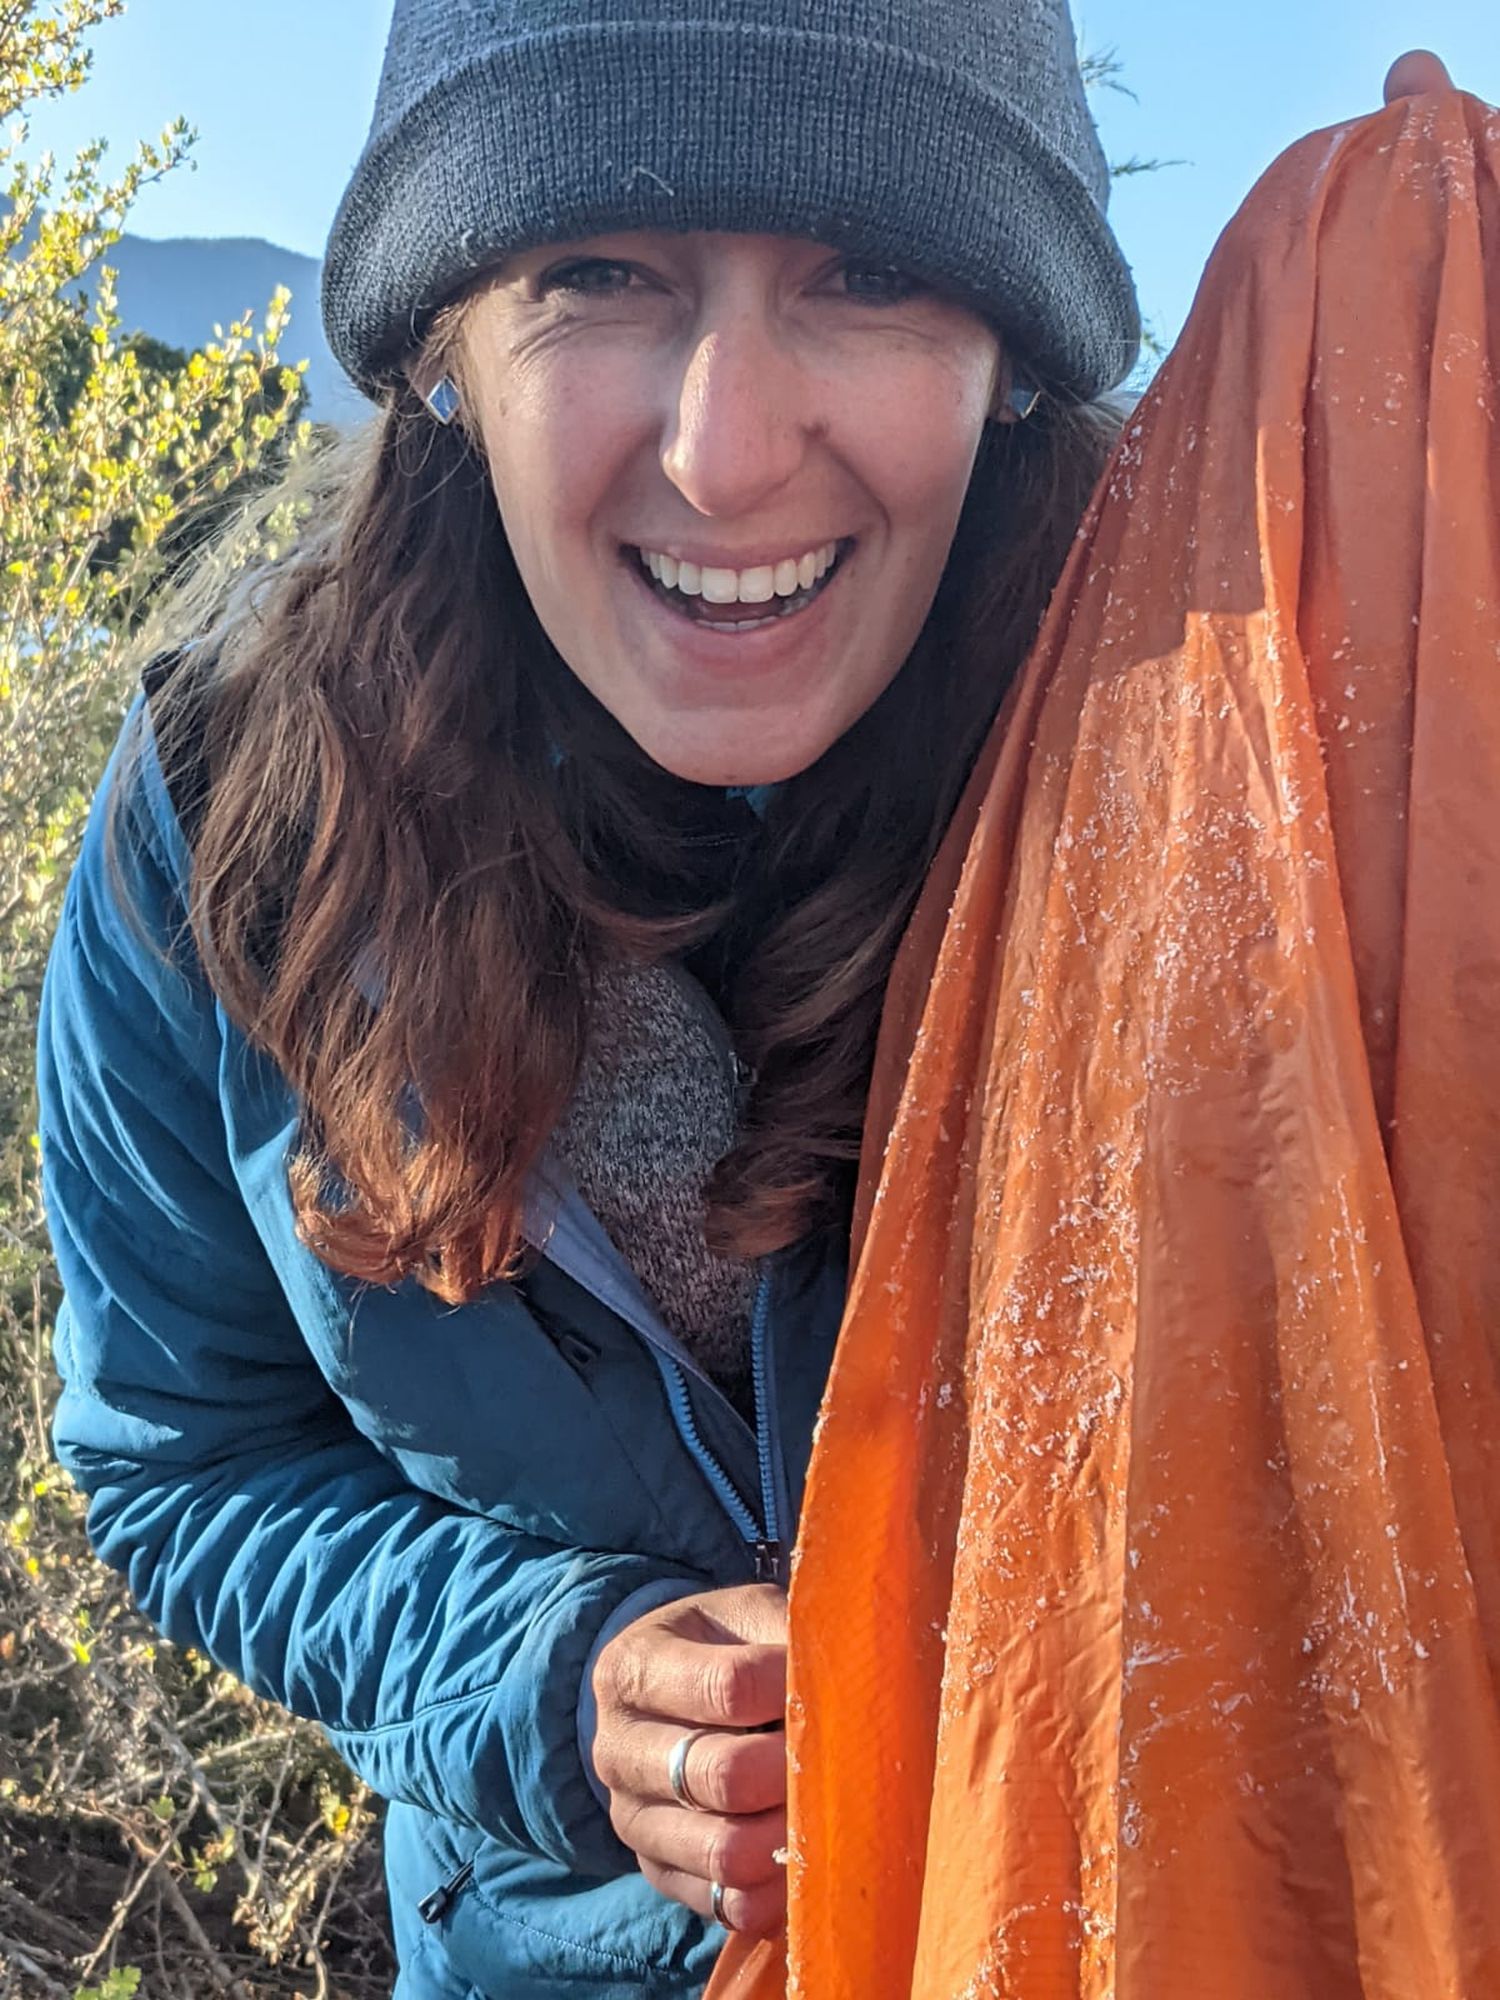 Showing off the frost accumlated on my tent after a chilly night at Great Sand Dunes National Park.